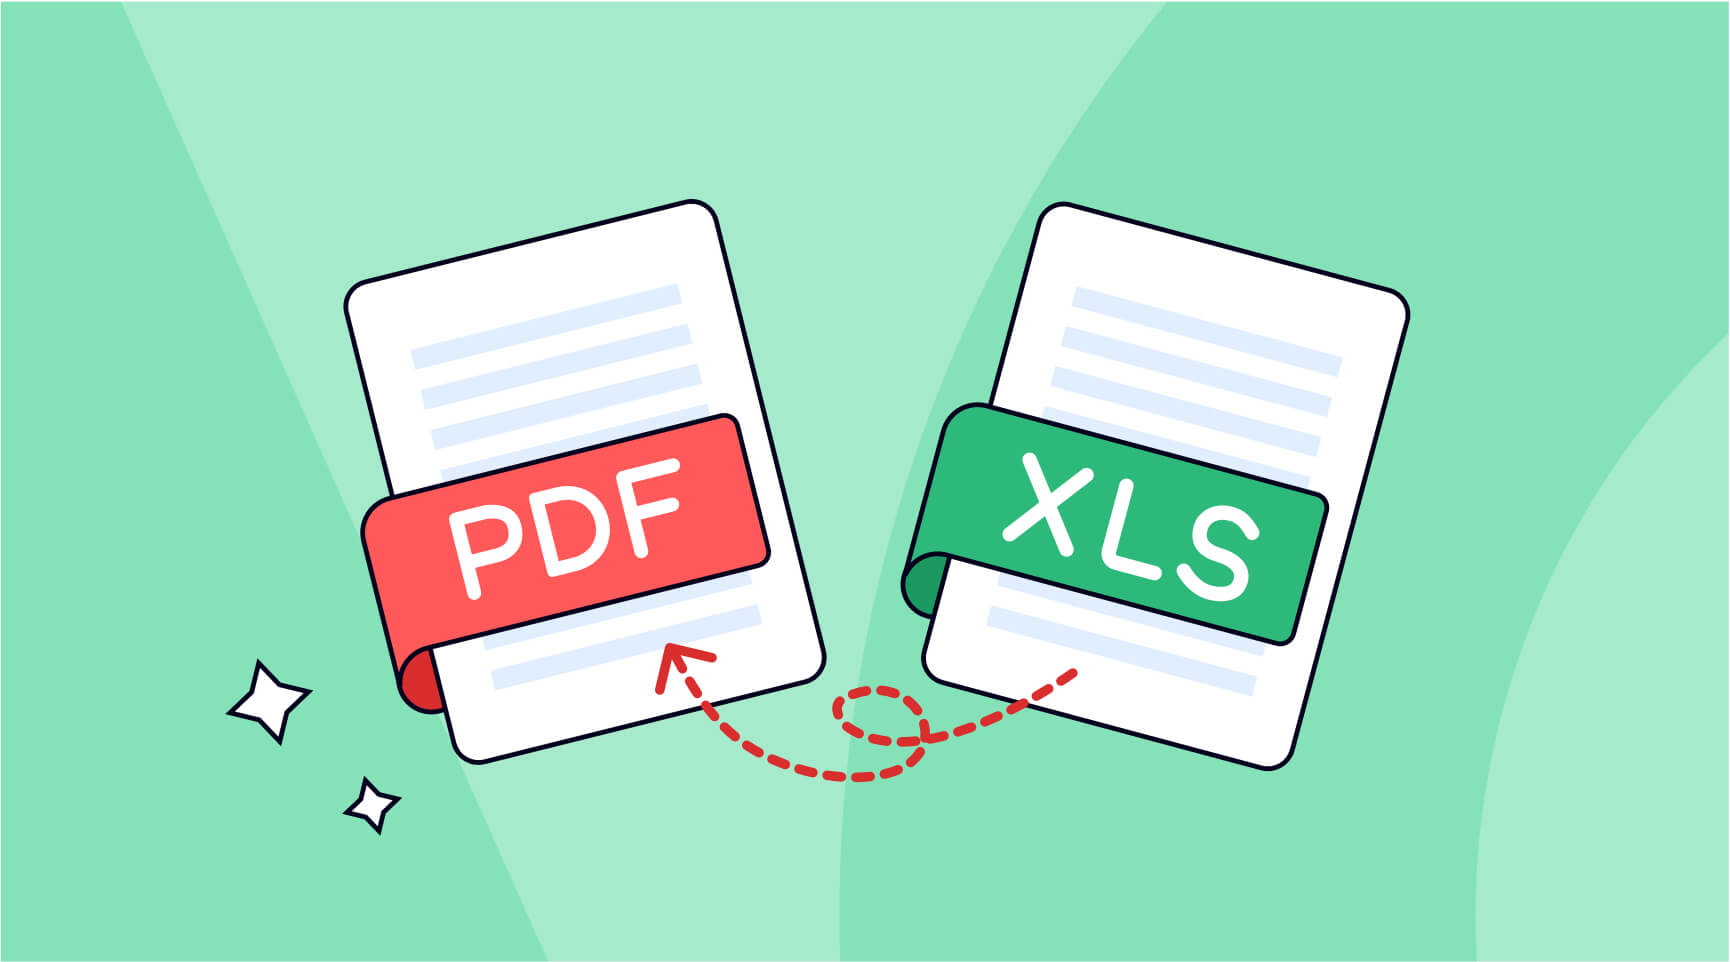 How to Convert Excel to PDF: Get the Hang of It